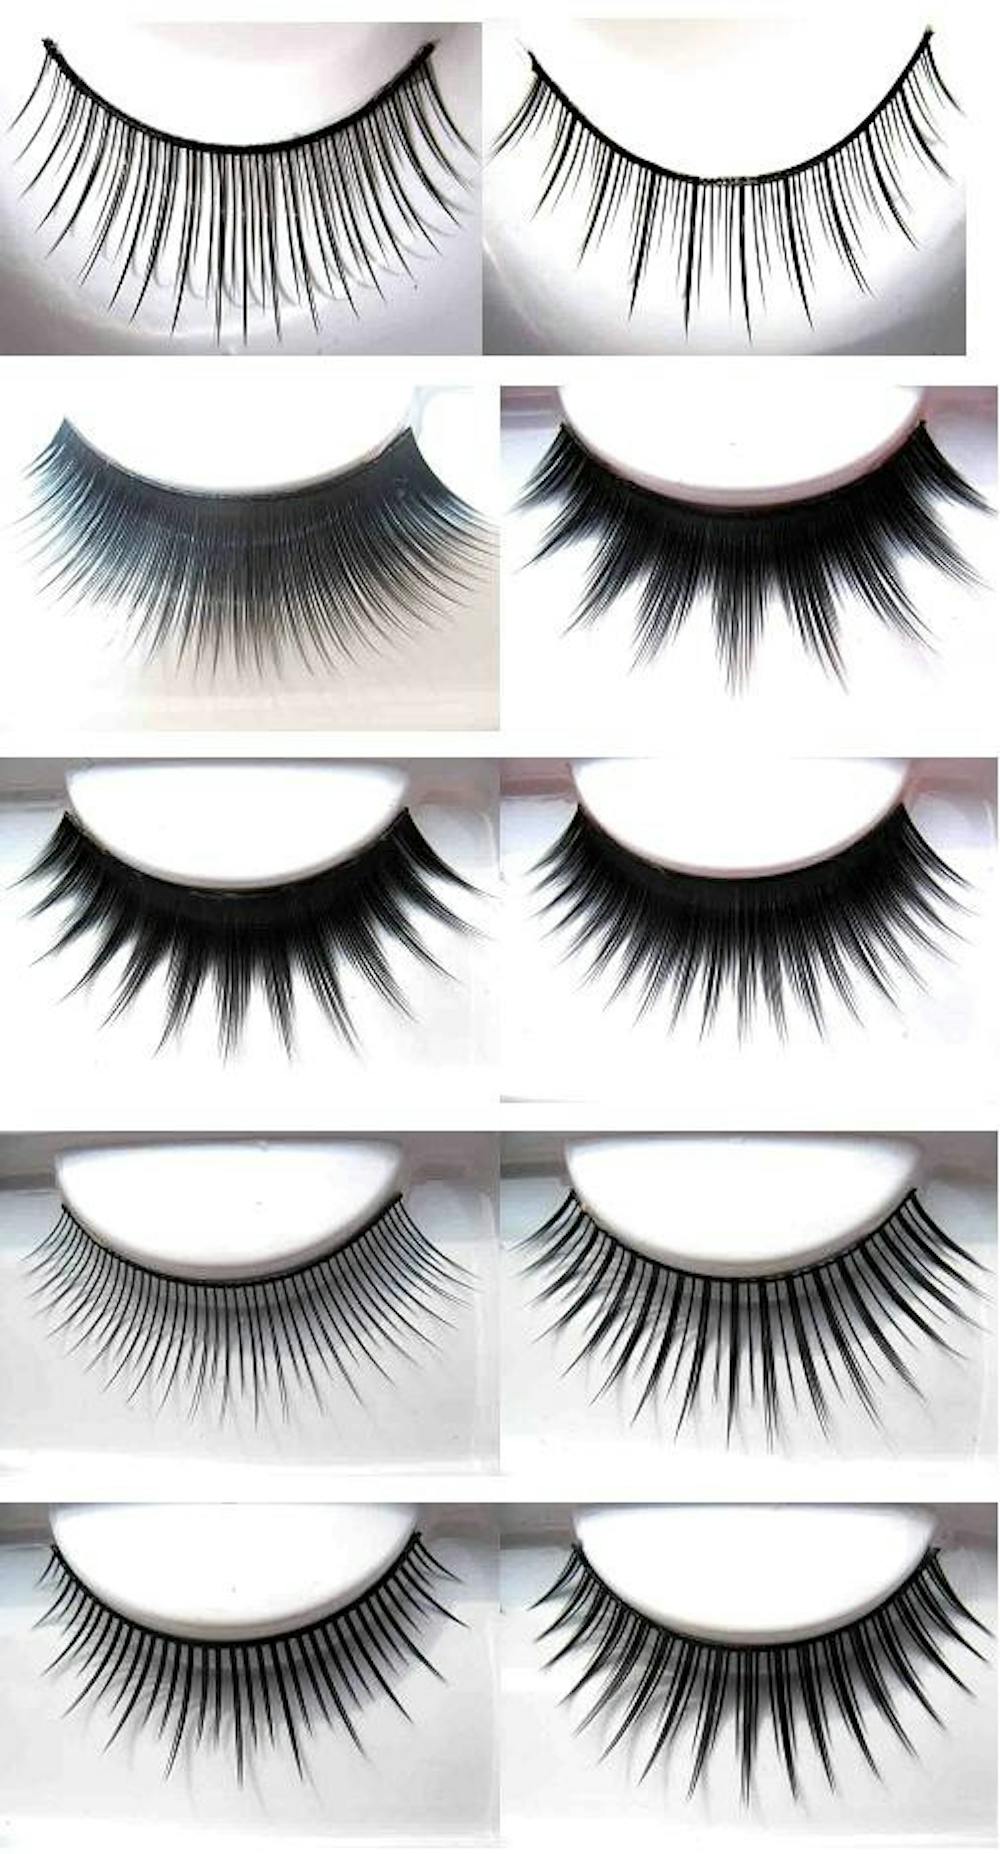 There are many types of false eyelashes. Photo from twoheartstogether.com.